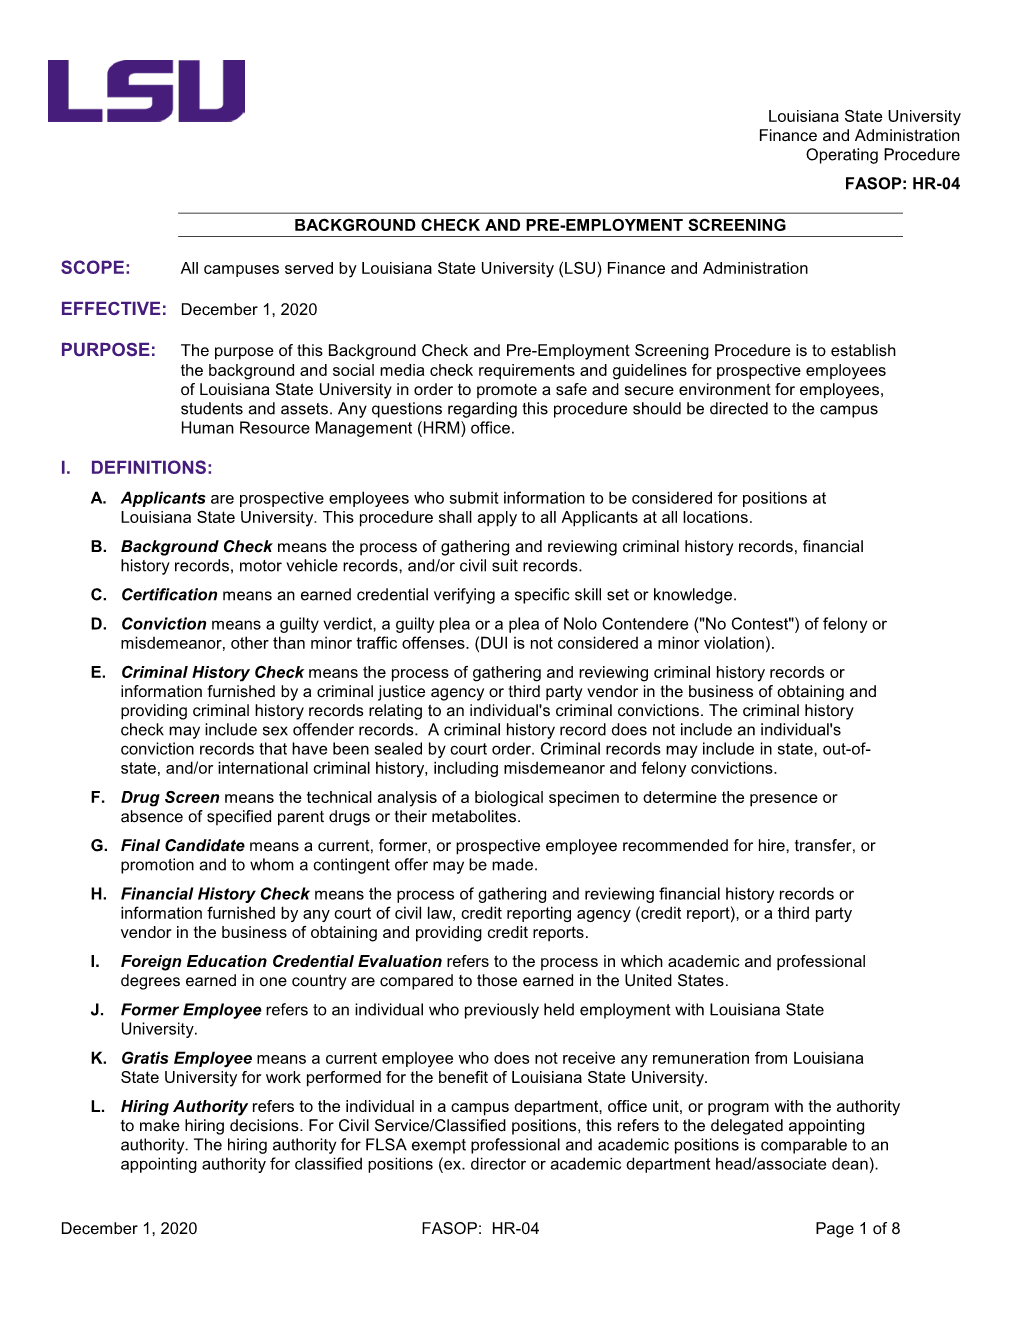 Background Check and Pre-Employment Screening